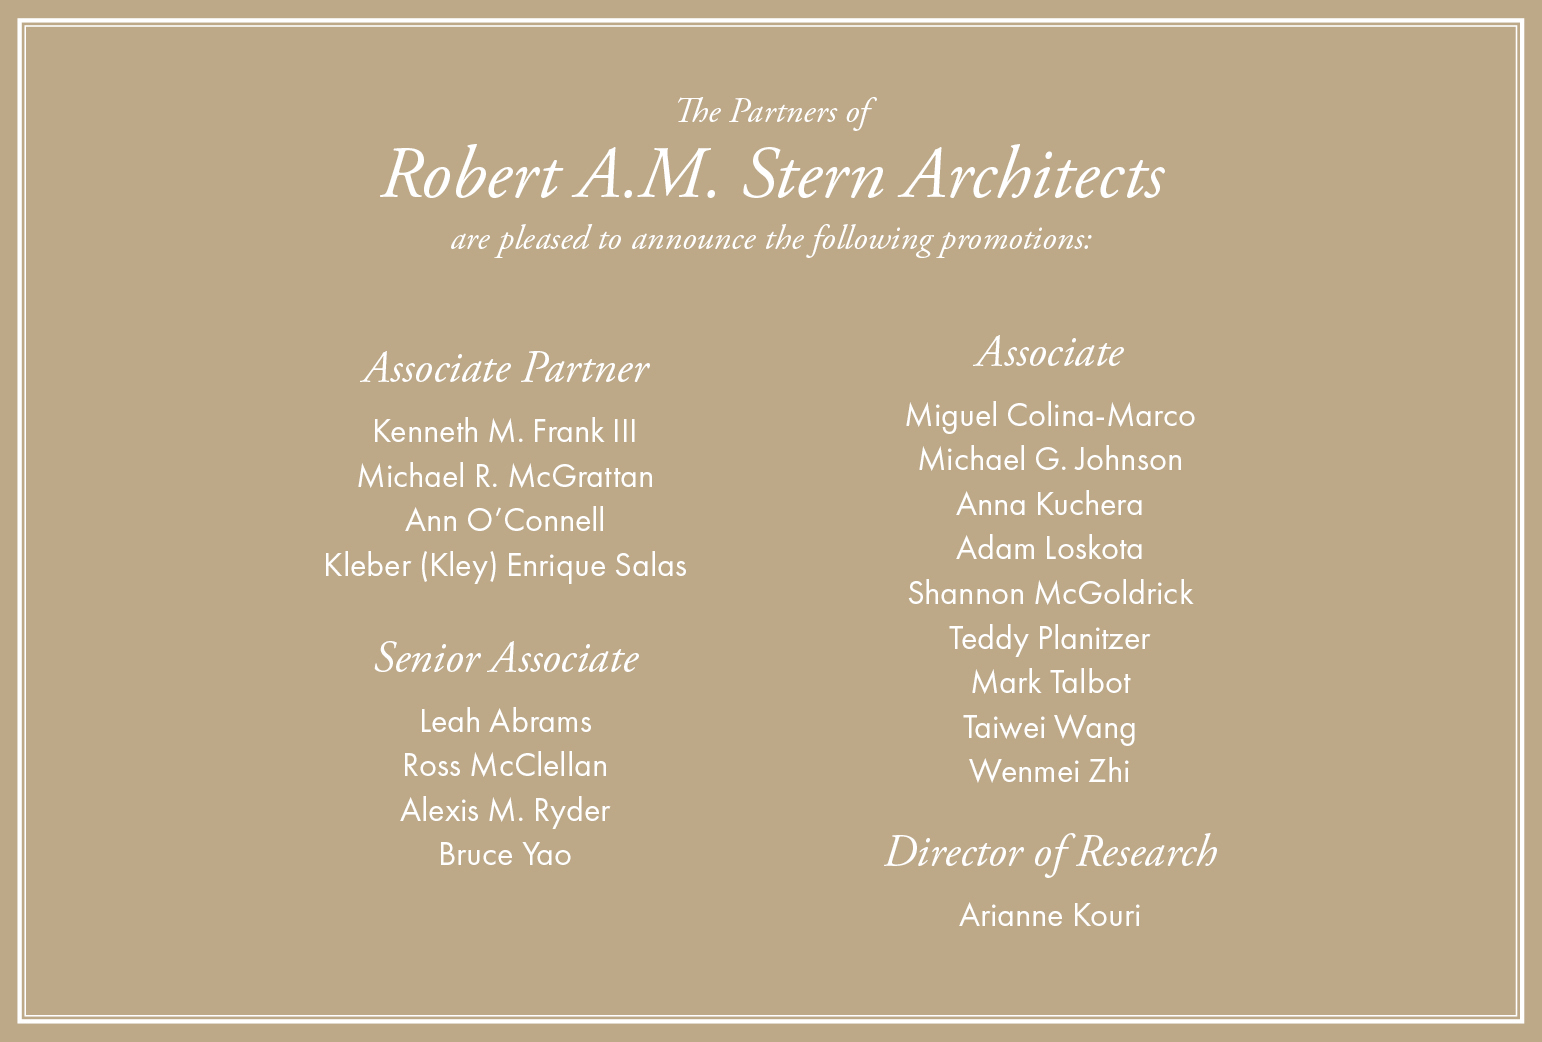 Robert A.M. Stern Architects Announces New Promotions